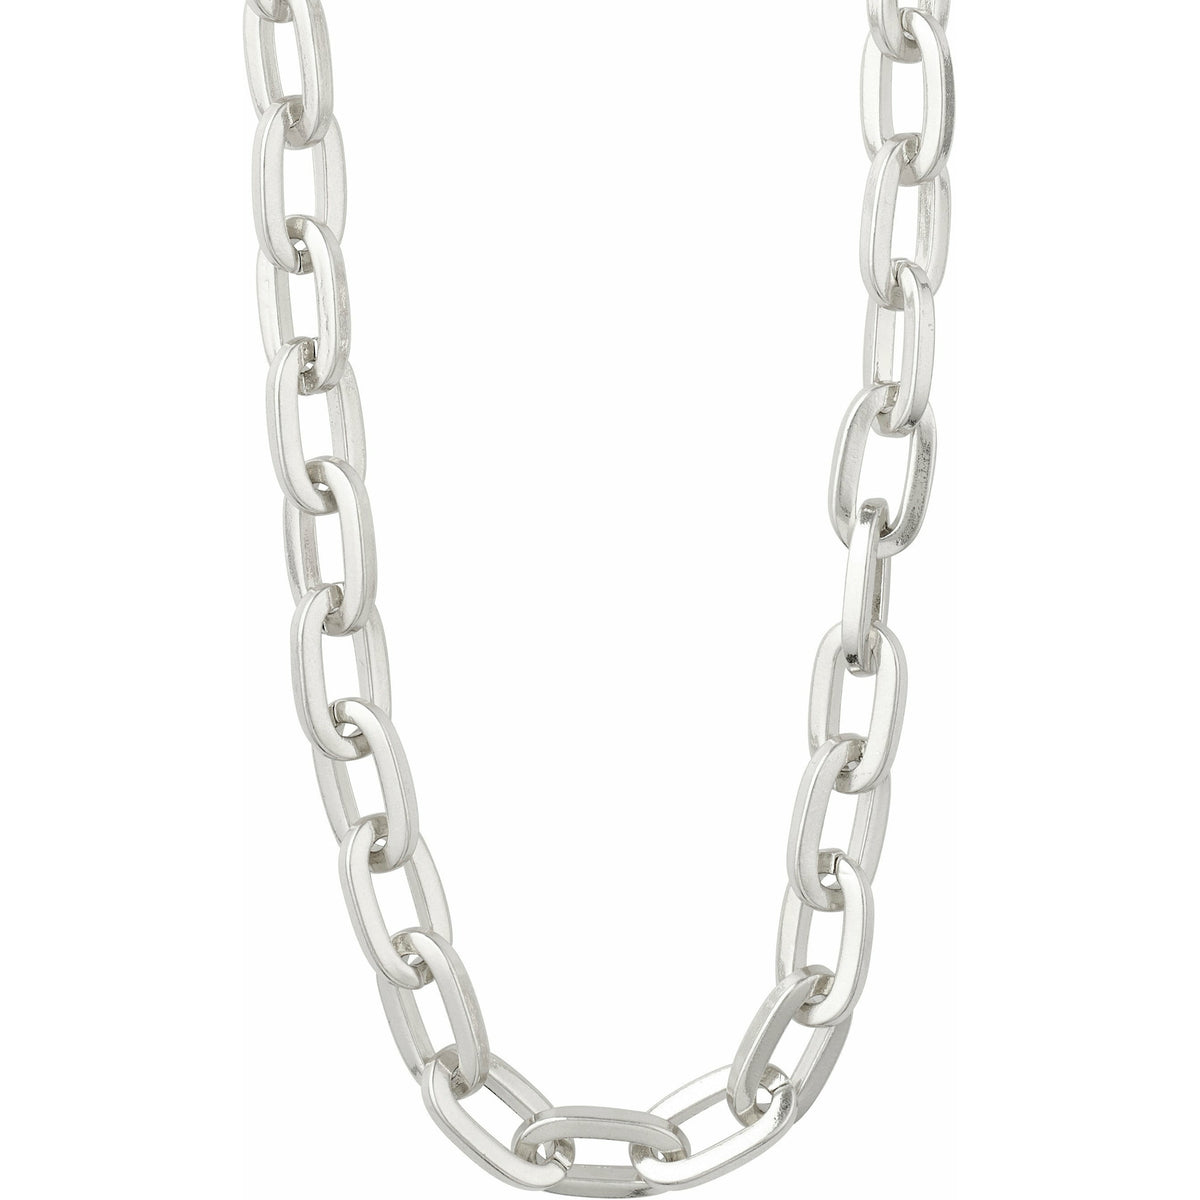 We love the edgy raw look this chunky chain link necklace brings. Can be styled as is or worn as a “y” chain. Layer it with your other favourite necklaces to create a unique look.  This necklace is from our Tolerance collection.  Tolerance to us, is the openness to discover common ground and learning from one another and creating strong bonds. Chain is 80cm